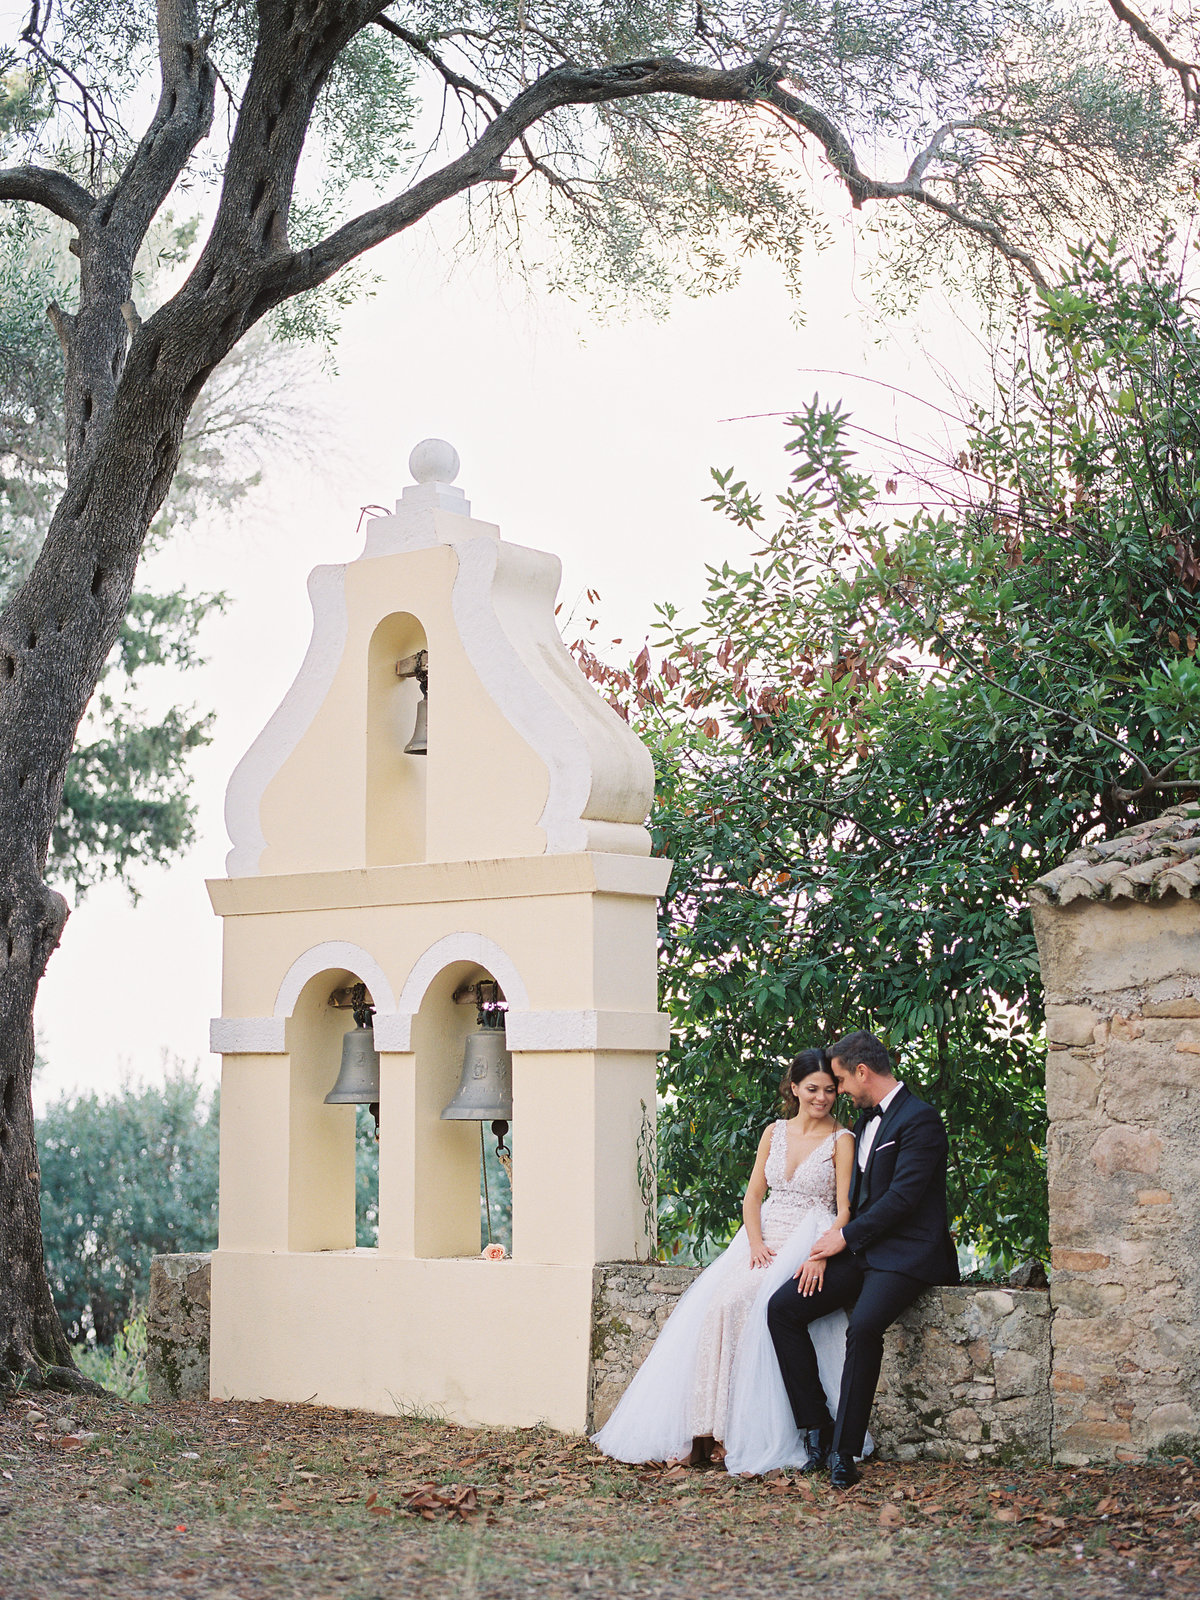 fine art wedding photography in corfu by Kostis Mouselimis on film_043